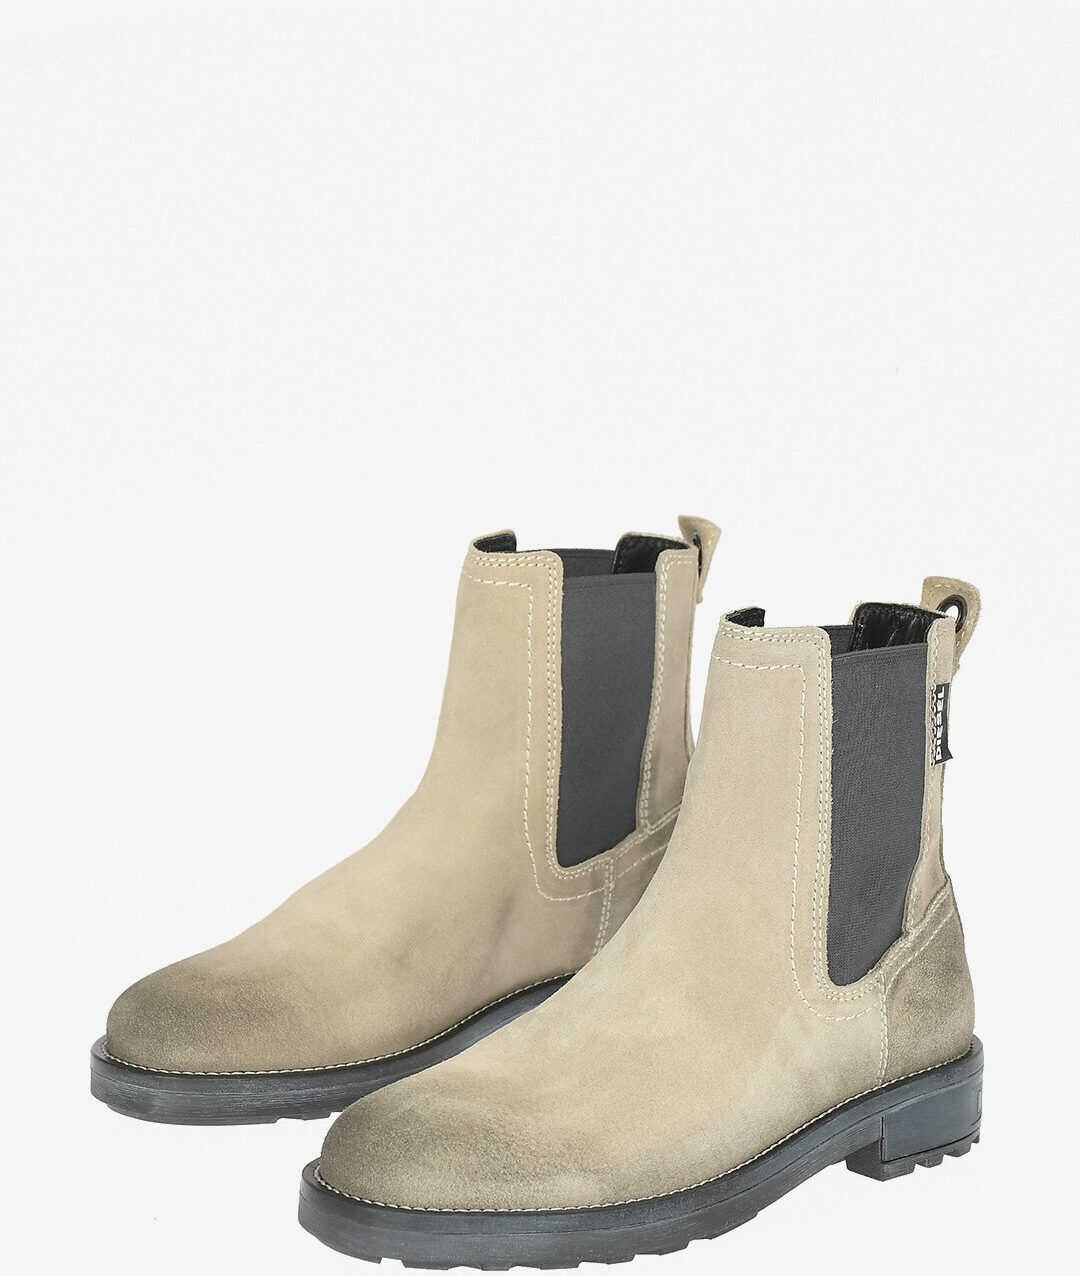 Diesel Suede Leather D-Throuper Chelsea Boots Gray b-mall.ro